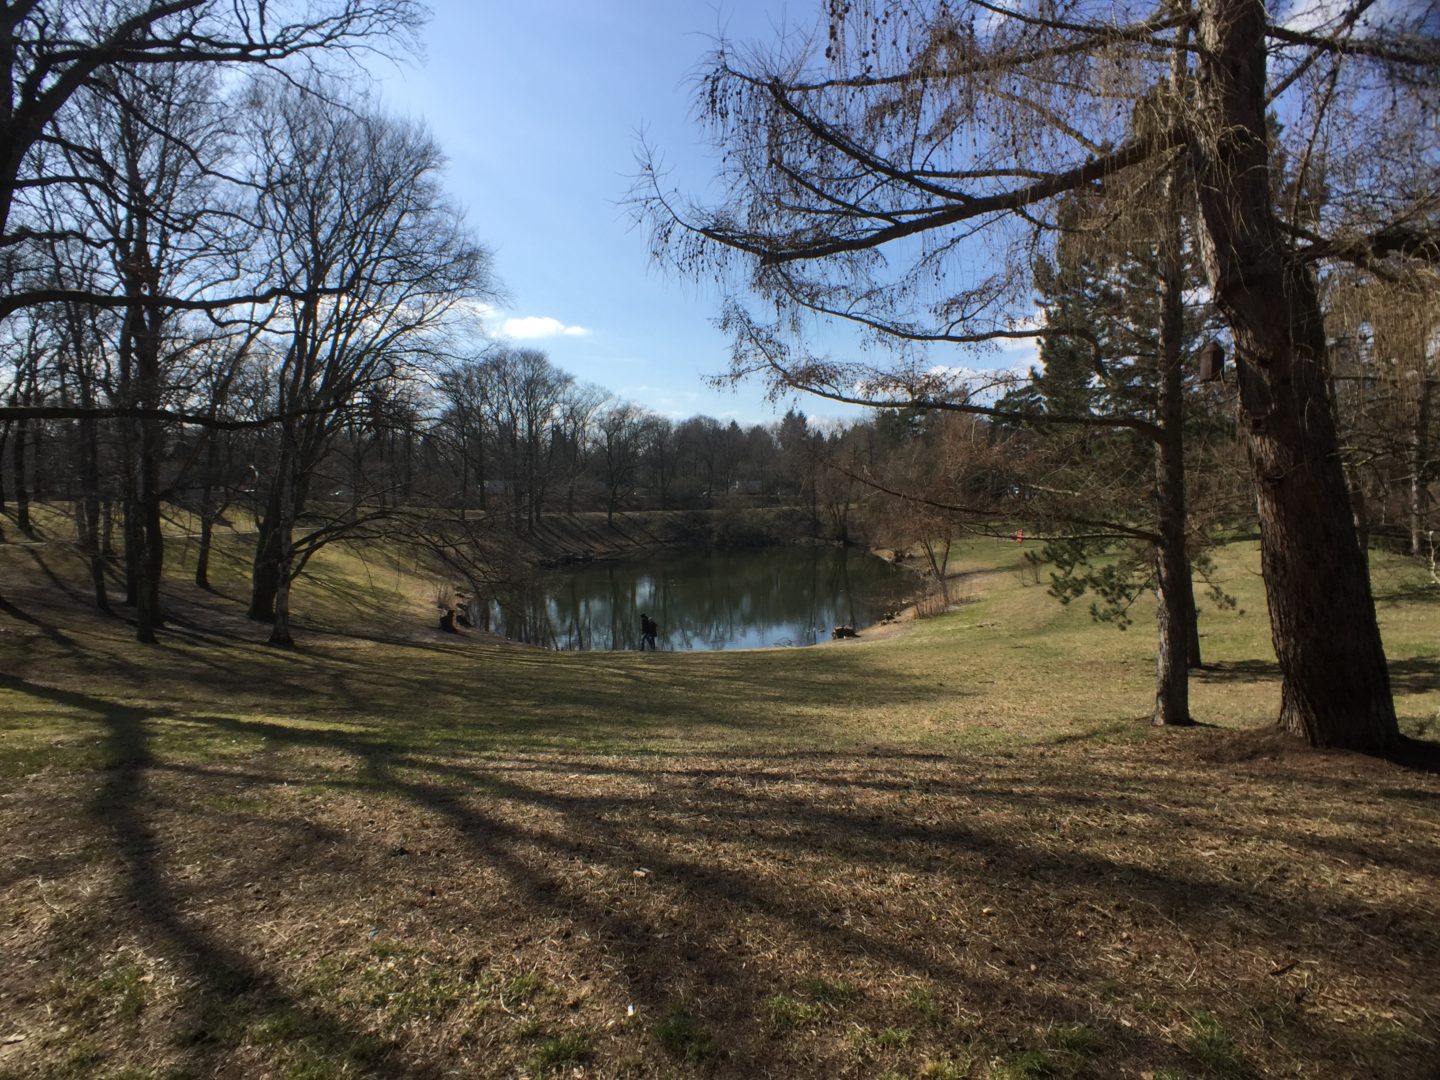 The kettle hole pond known as Blanke Helle, in the Tempelhof district of Berlin. A deep grassy bowel with a pond at its center, surrounded by trees.
